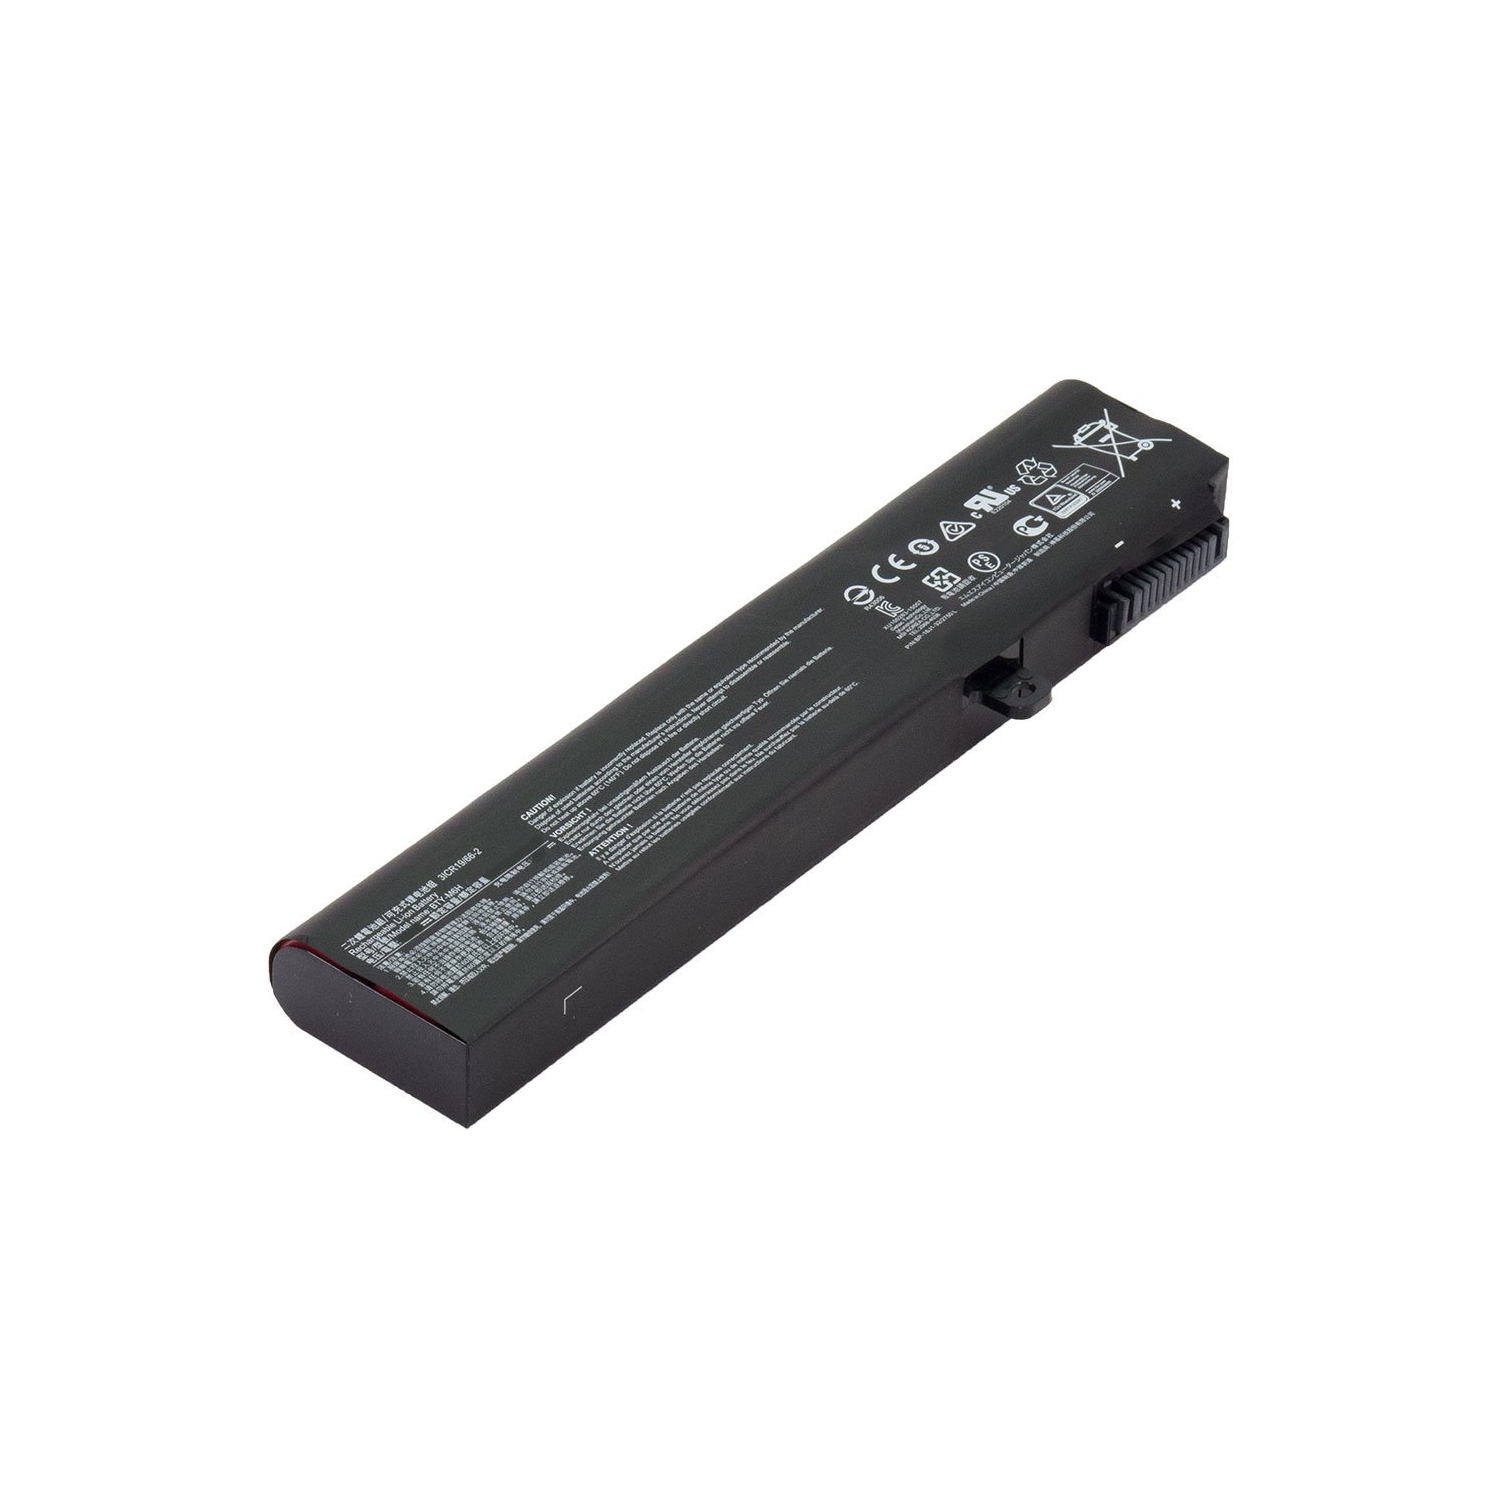 Laptop Battery Replacement for MSI GP62 6QG-1071XCN, 3ICR19/66-2, BTY-M6H